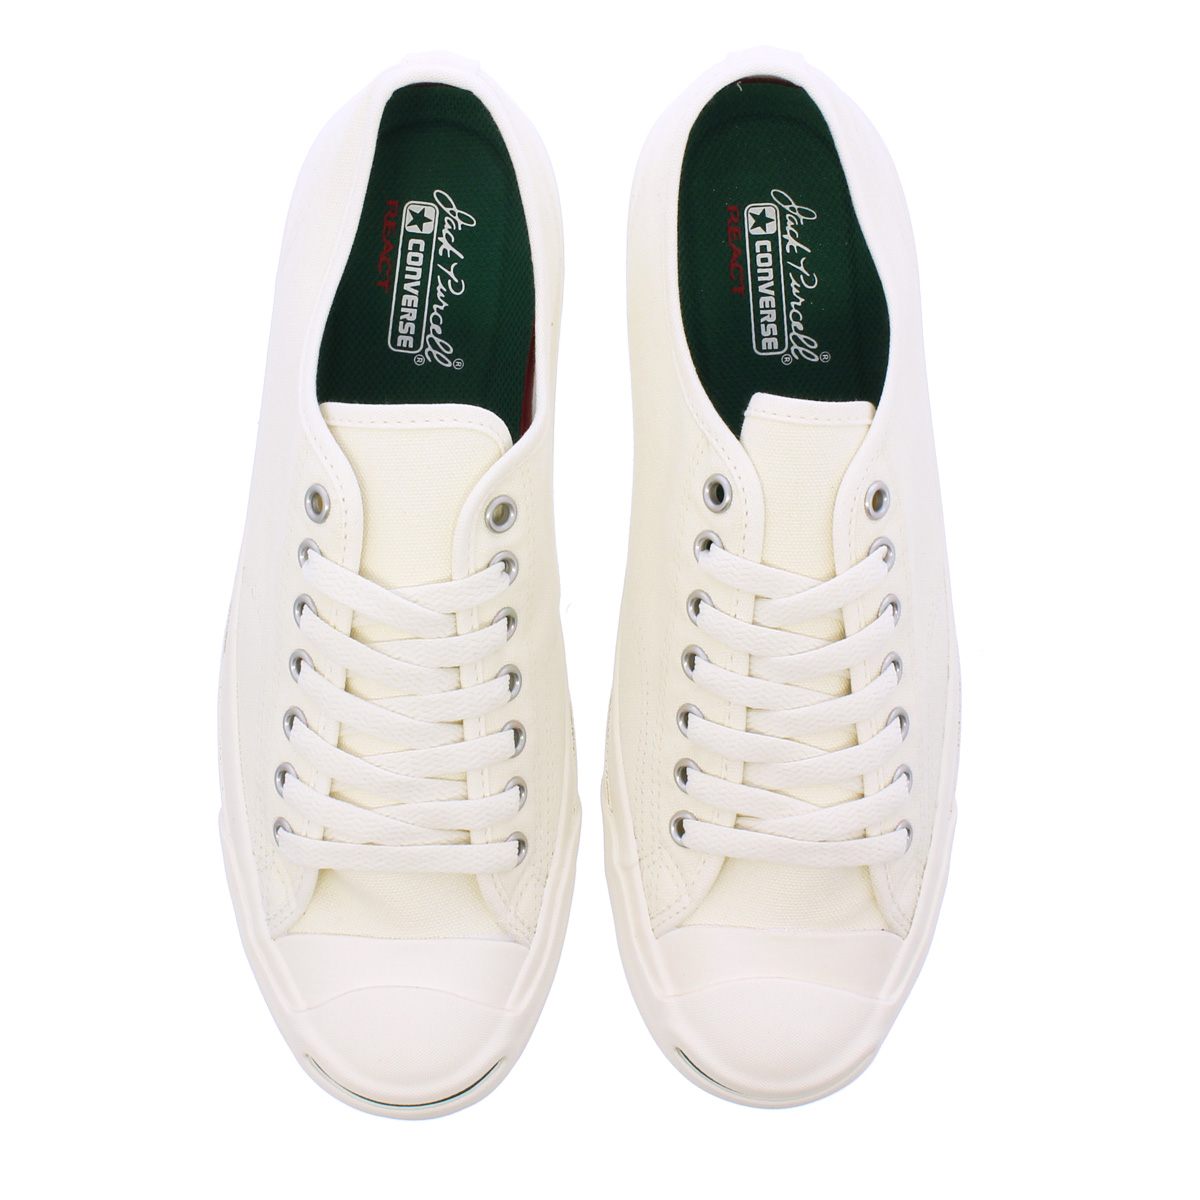 converse jack purcell wr canvas